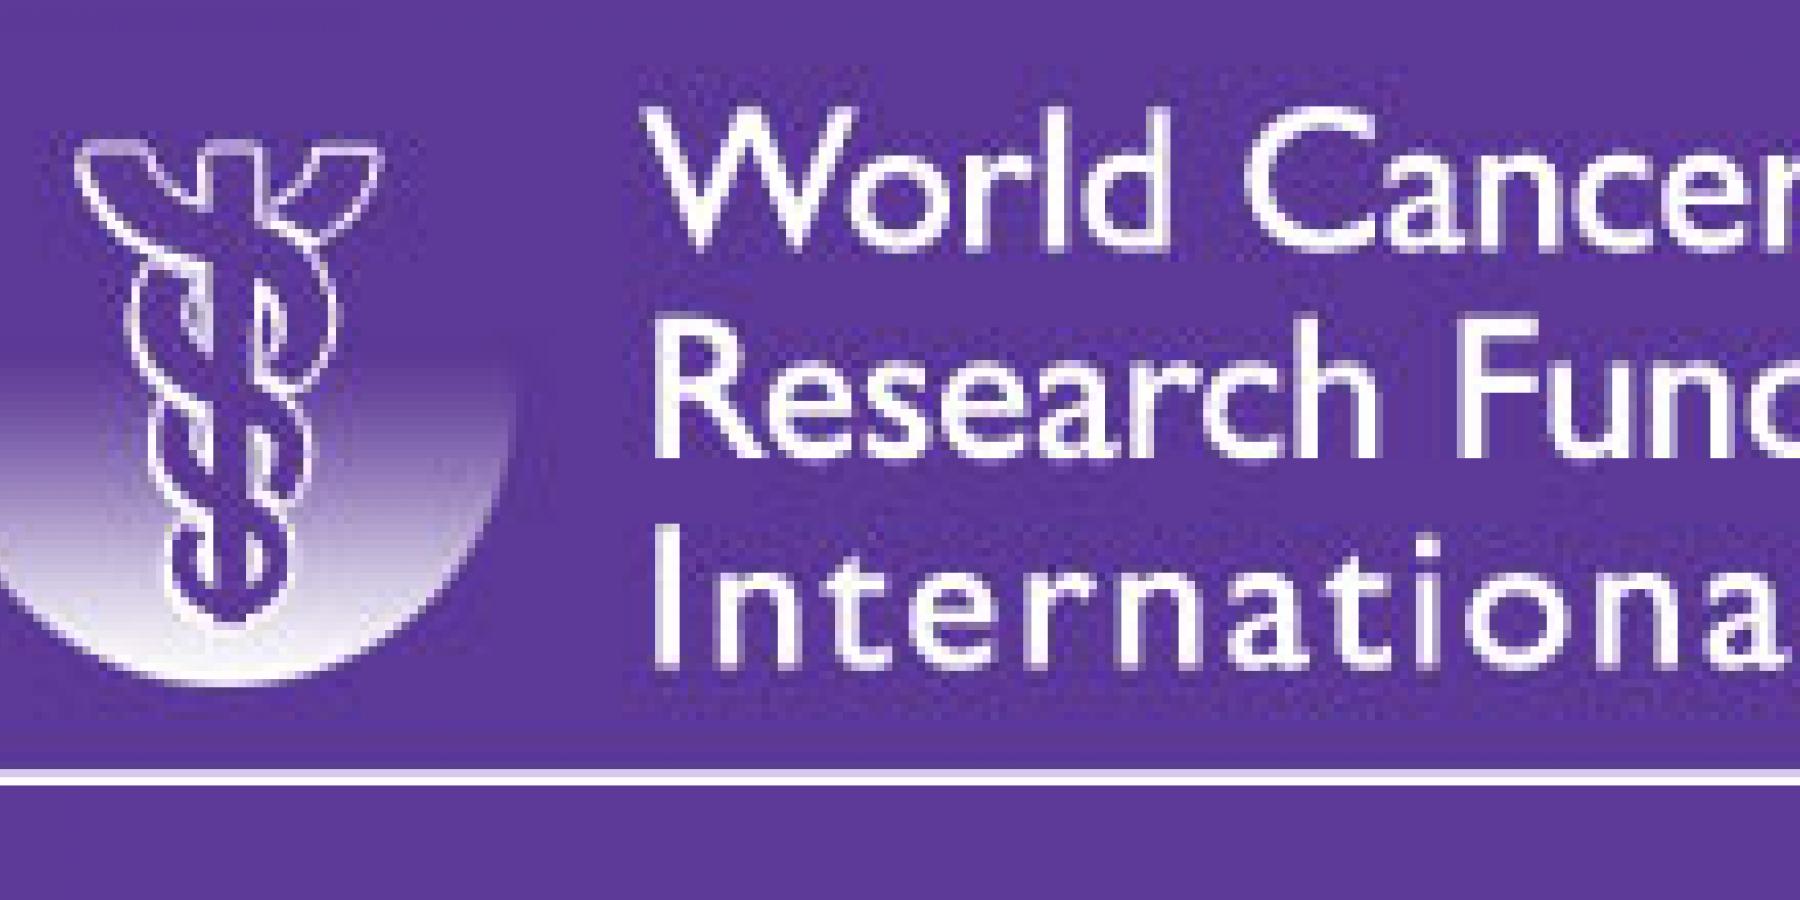 world cancer research fund